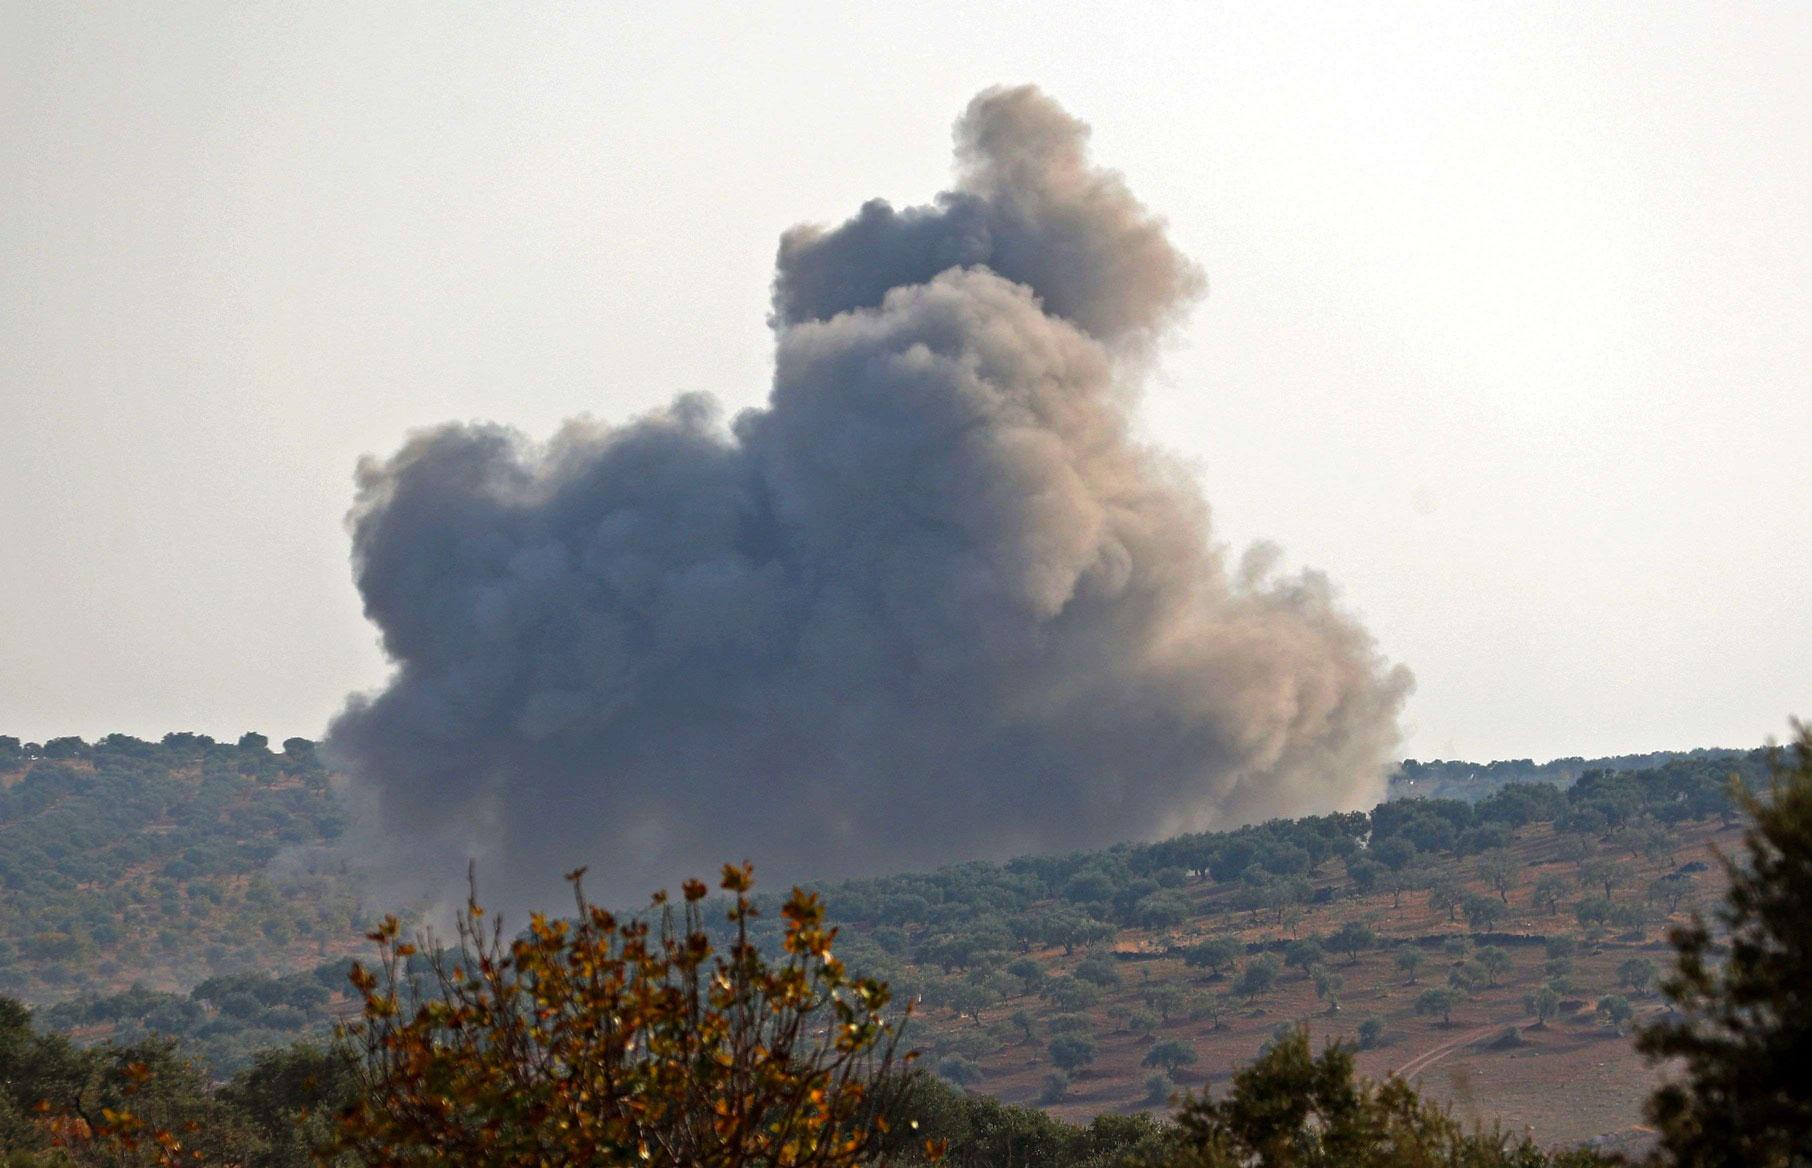 On Sunday morning, clouds of smoke rose over the Maaret al-Numan region as warplanes pounded jihadists and allied rebels